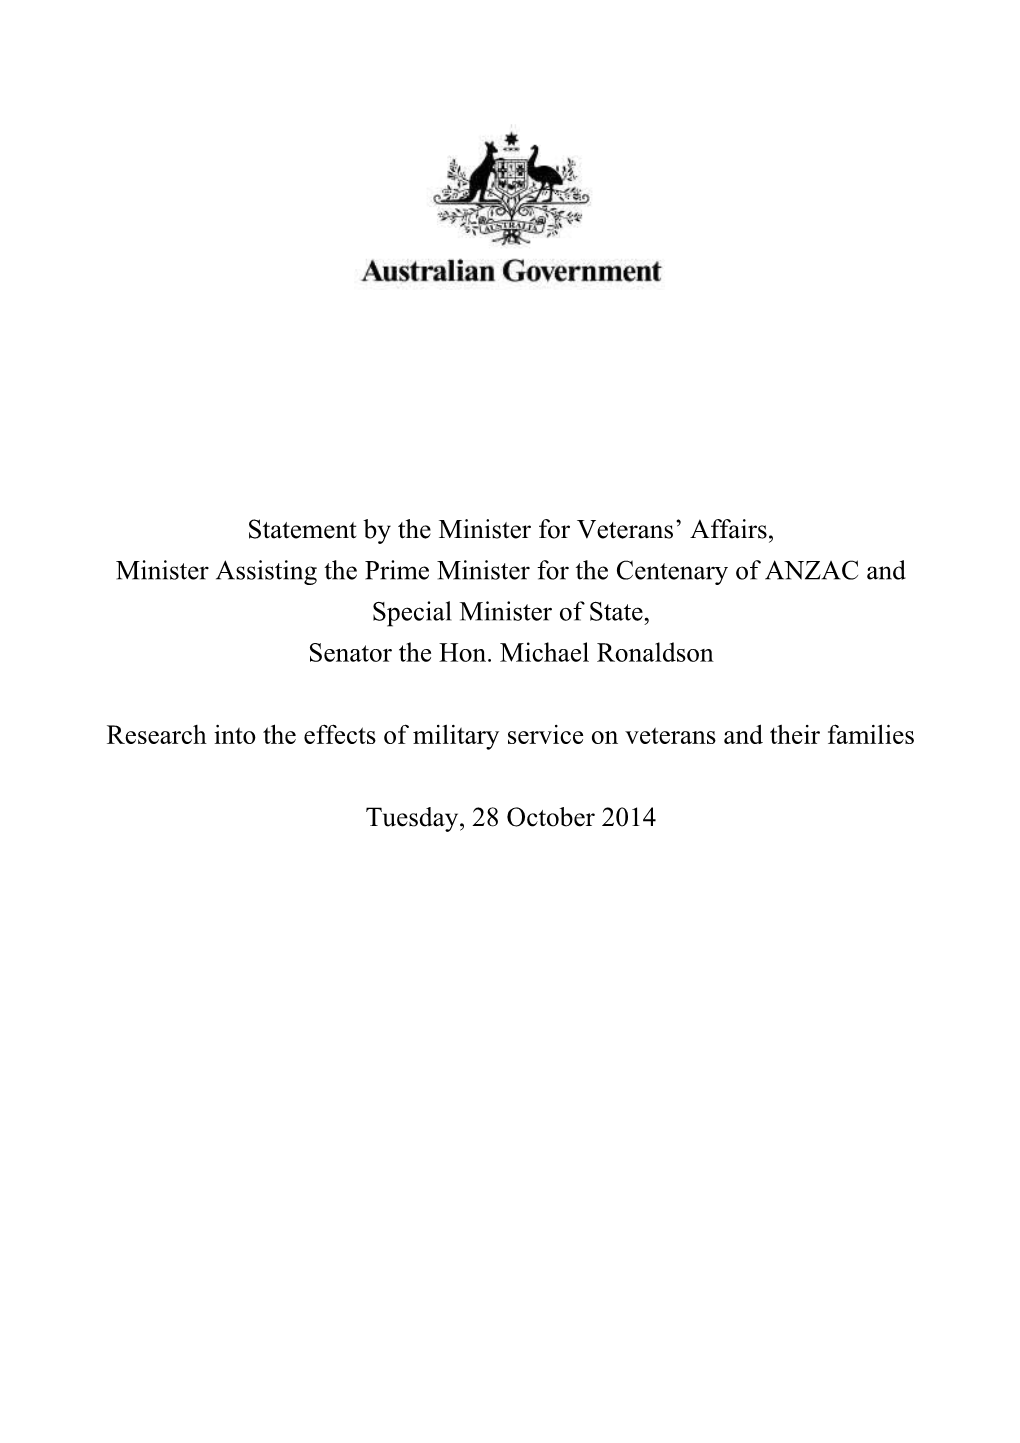 Statement by the Minister for Veterans Affairs